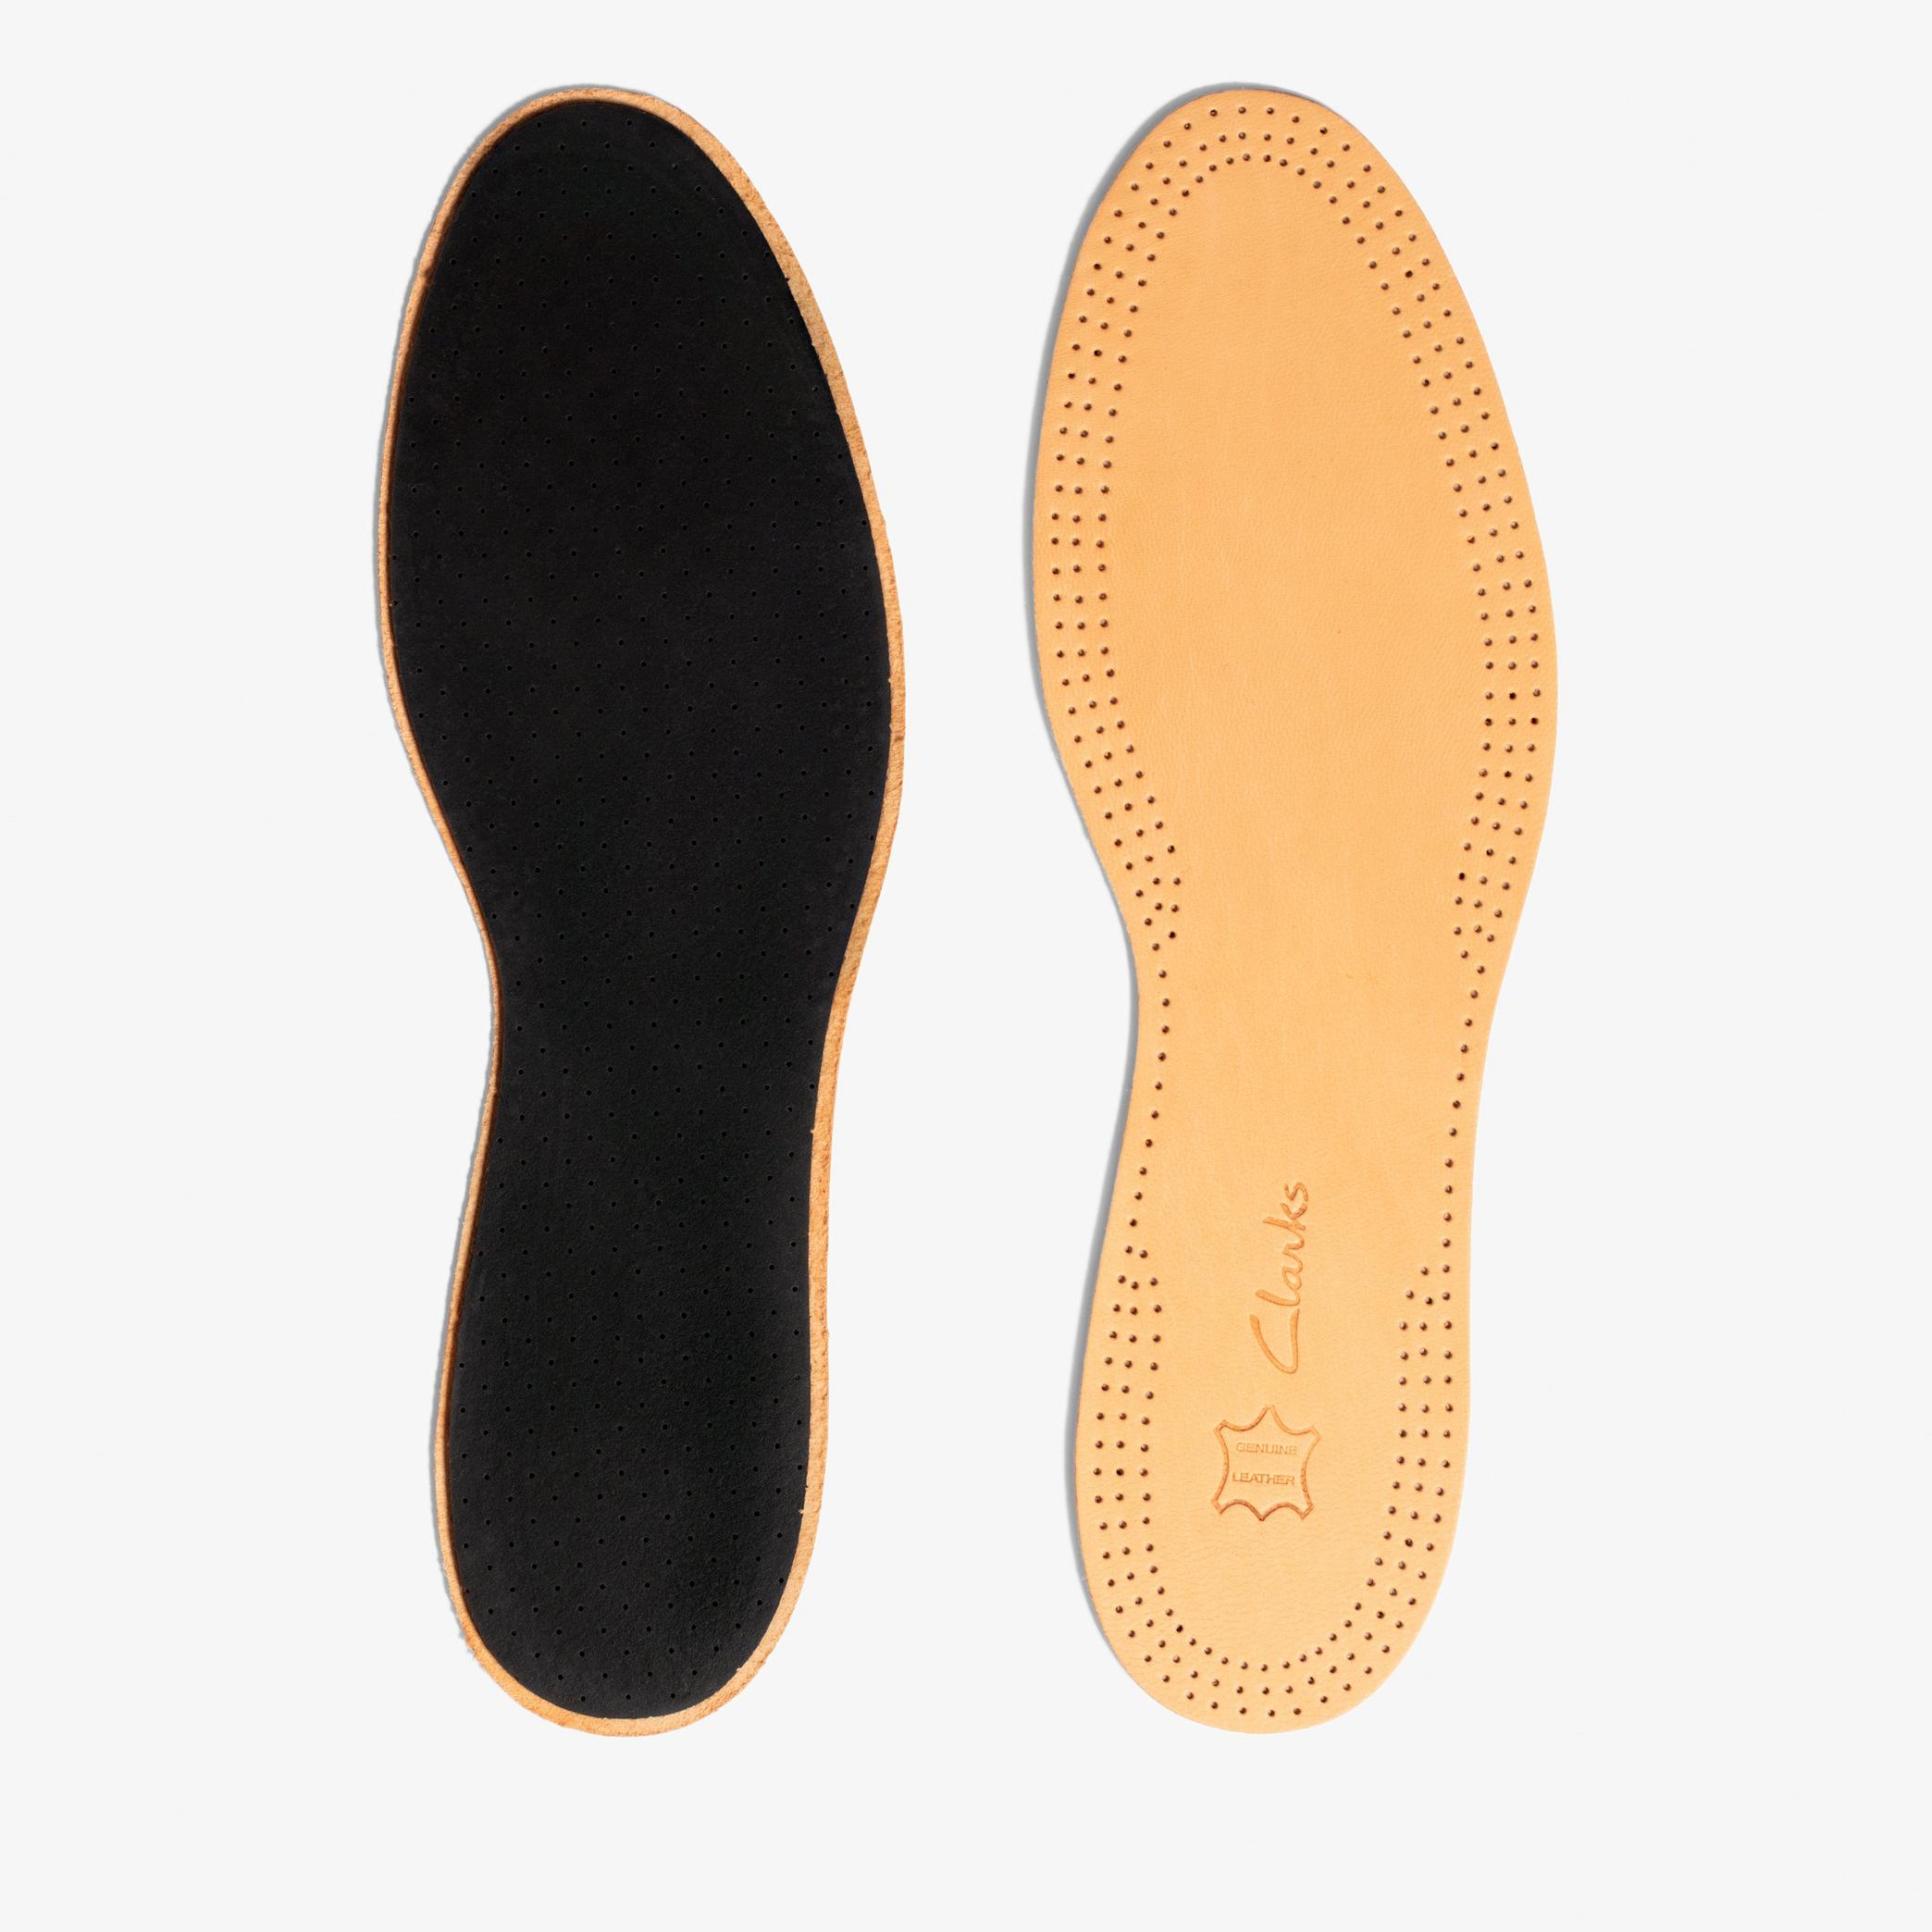 Leather insole size 3  Insoles, view 2 of 3